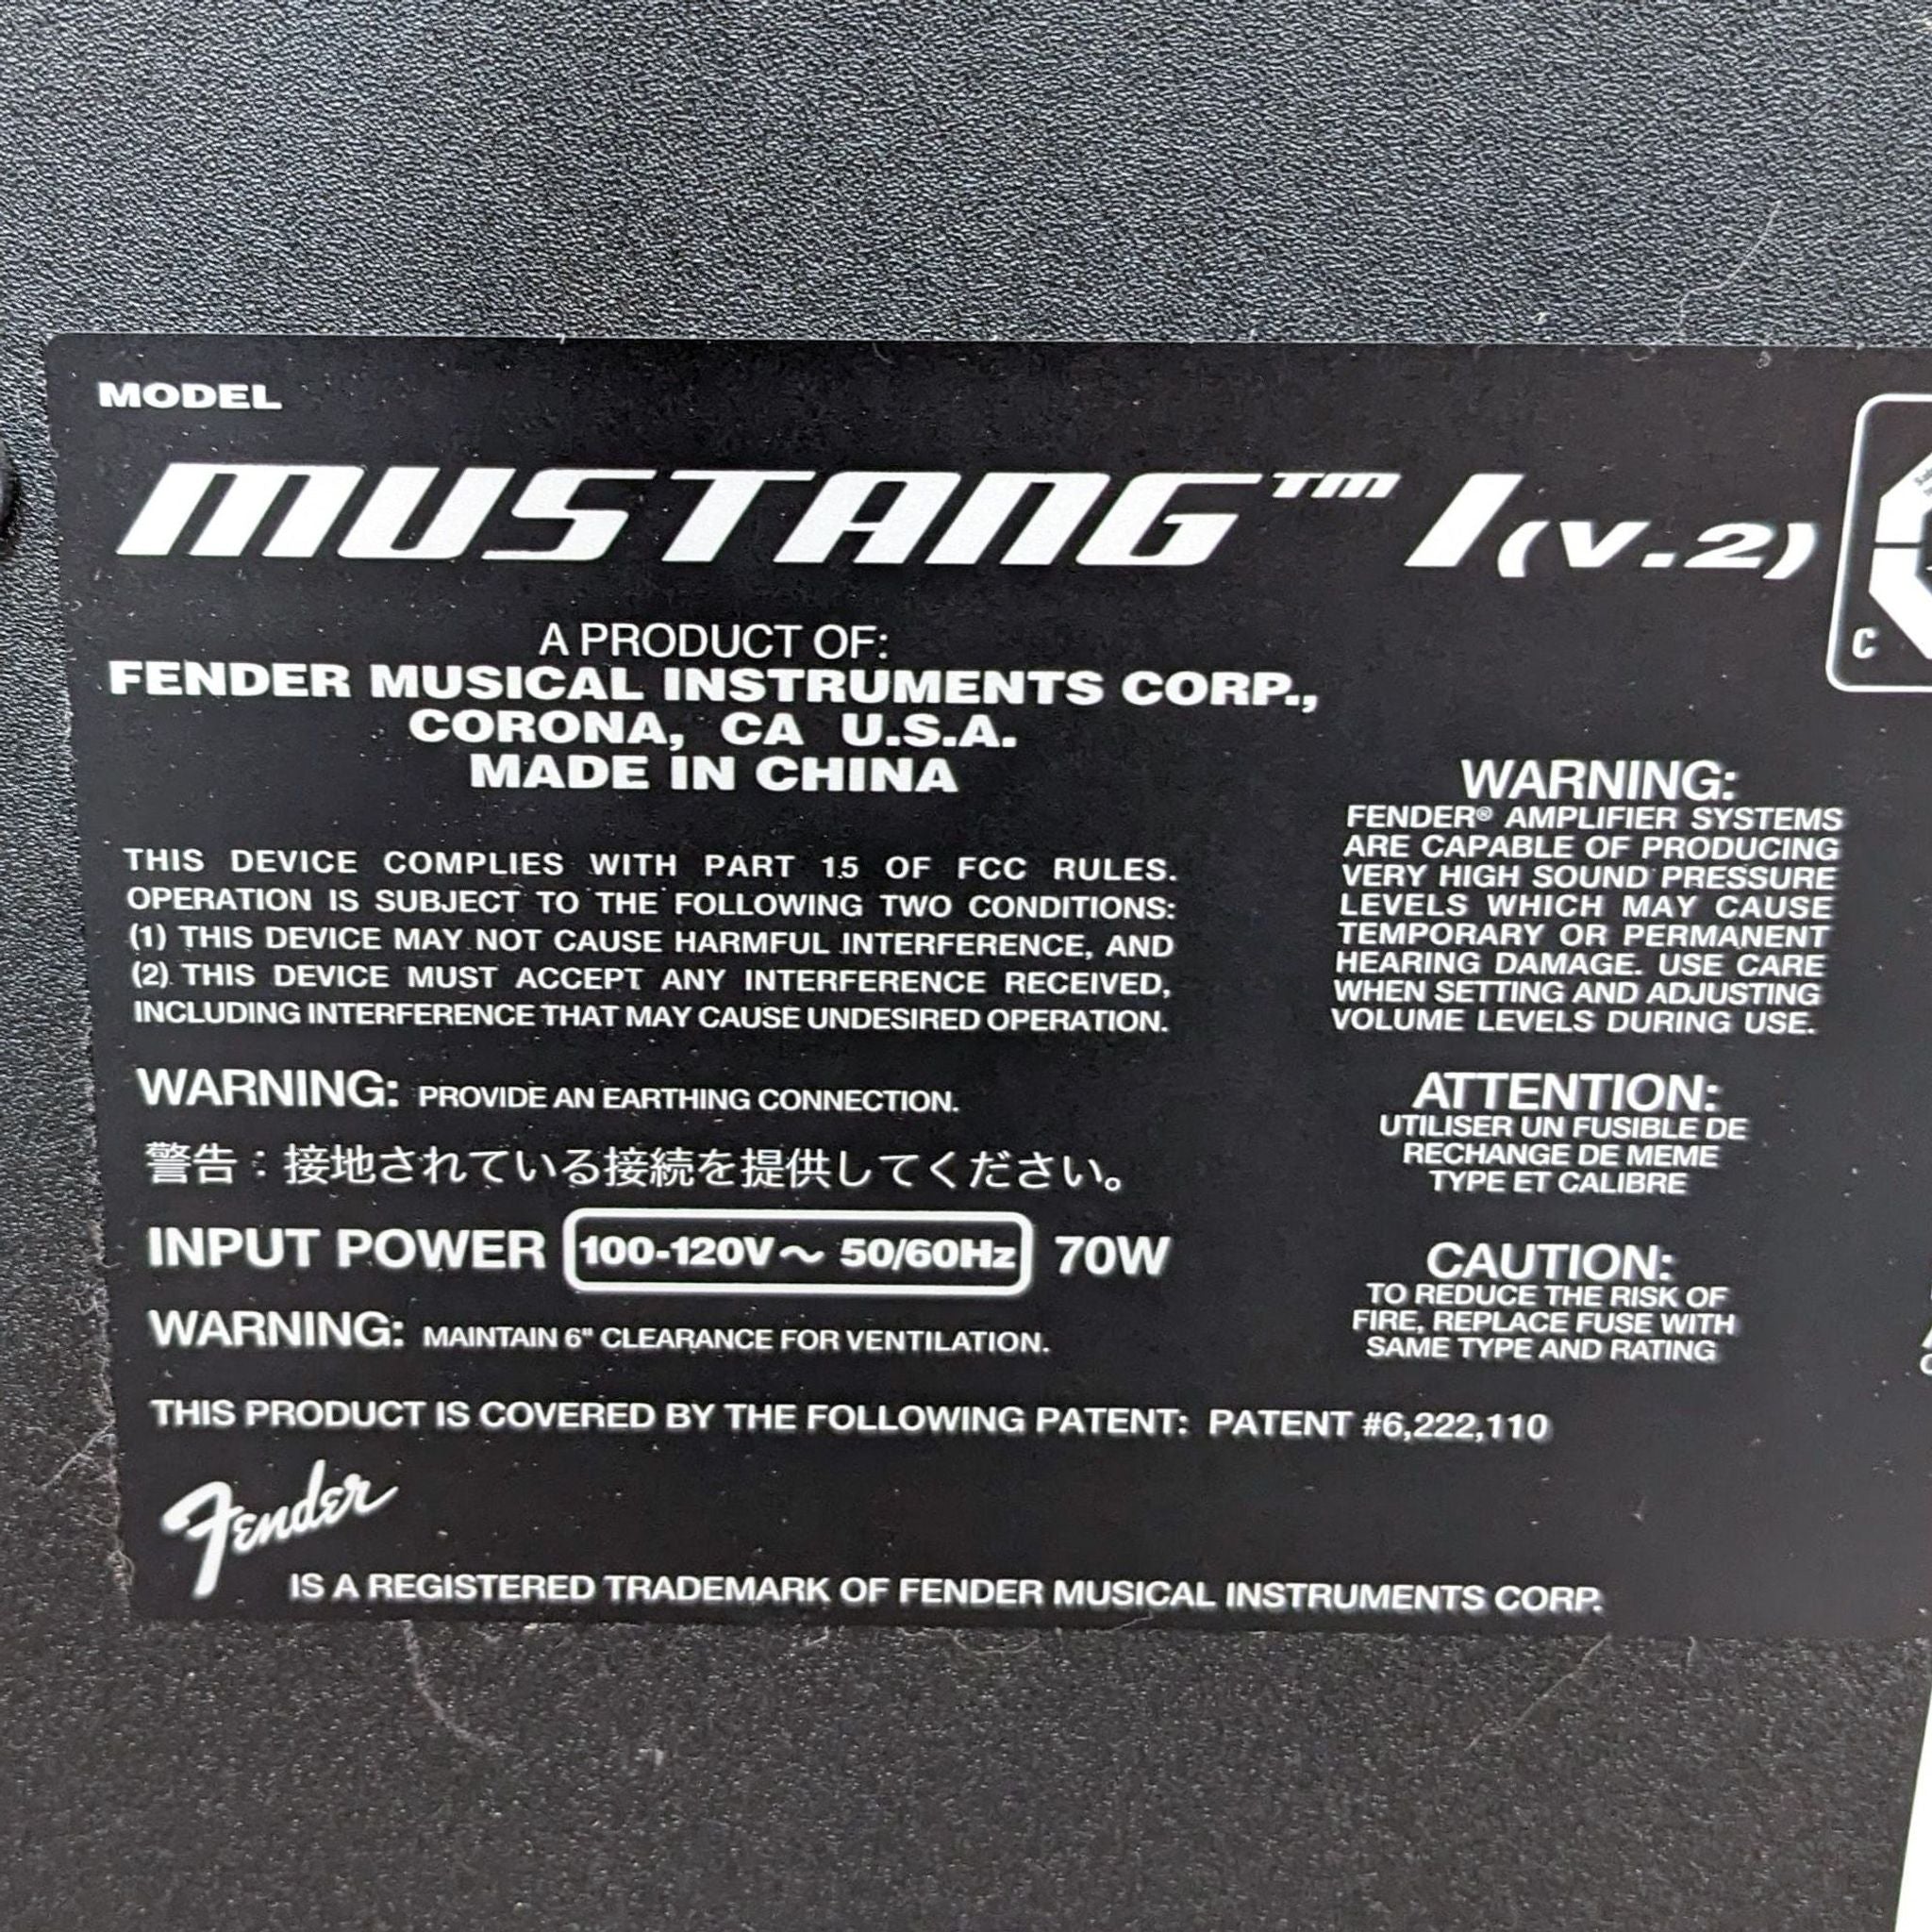 Close-up of a Fender Mustang guitar amplifier detail label indicating model, power specifications, warnings, and branding.